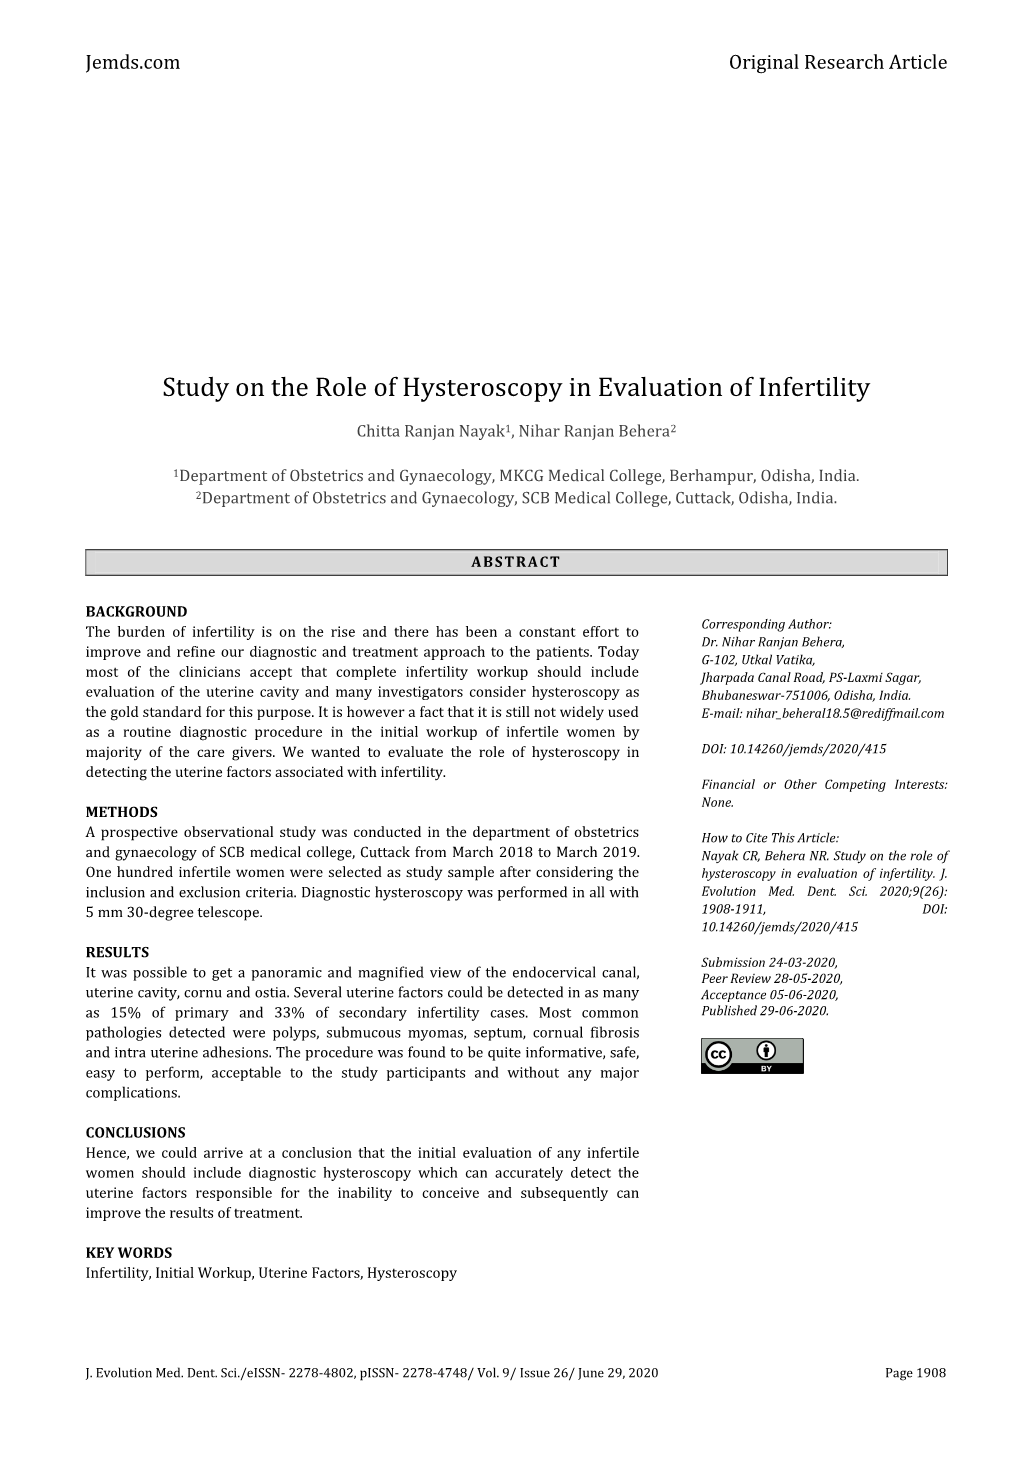 Study on the Role of Hysteroscopy in Evaluation of Infertility